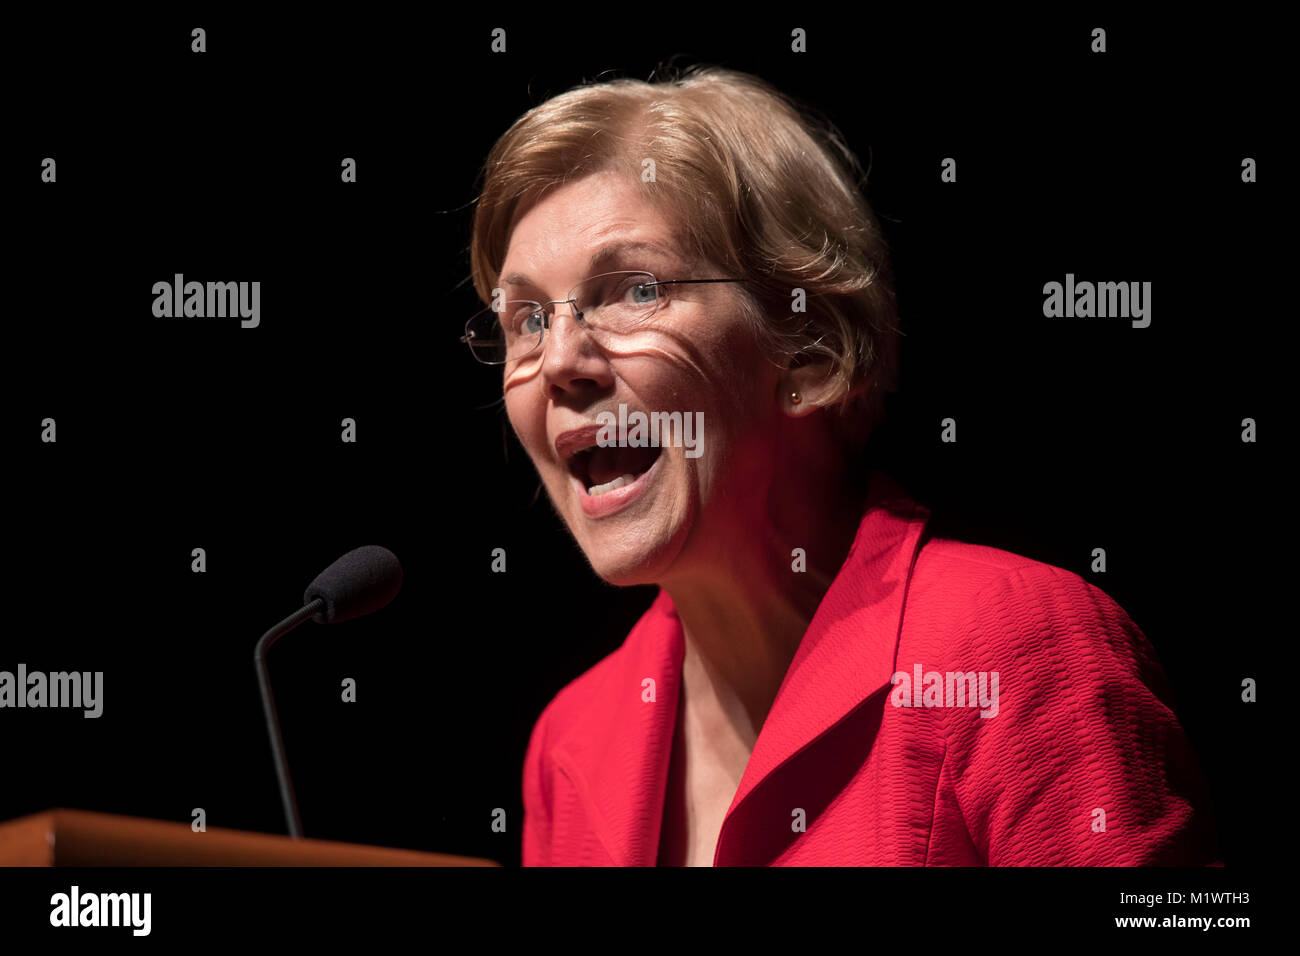 United States senator Elizabeth Warren, a Democrat from Massachusetts, speaks at a 15th anniversary fundraising event in Austin, Texas, for Annie's List, a group that raises money for liberal female political candidates. Warren talked about her early troubles finding child care and how it almost derailed her career. Stock Photo